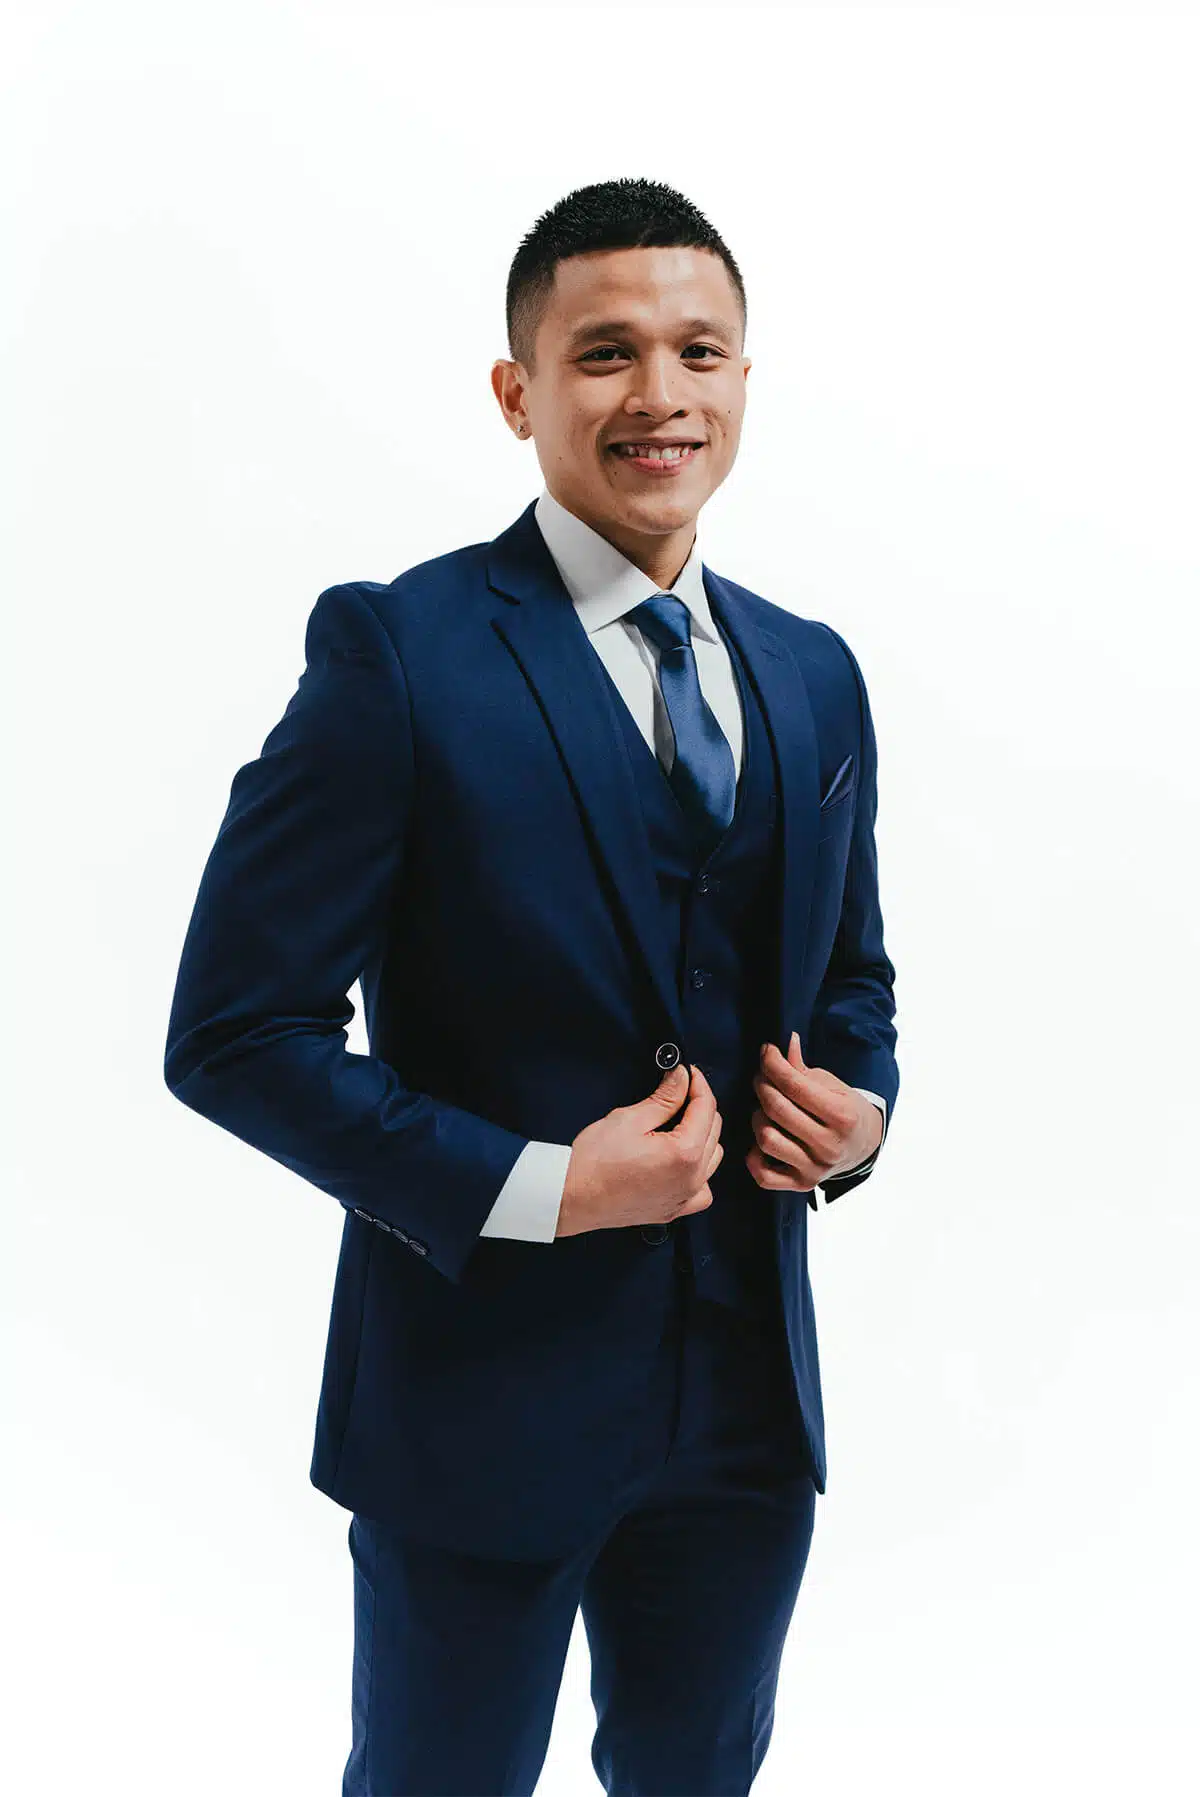 Smiling groom wearing a navy three-piece winter wedding suit